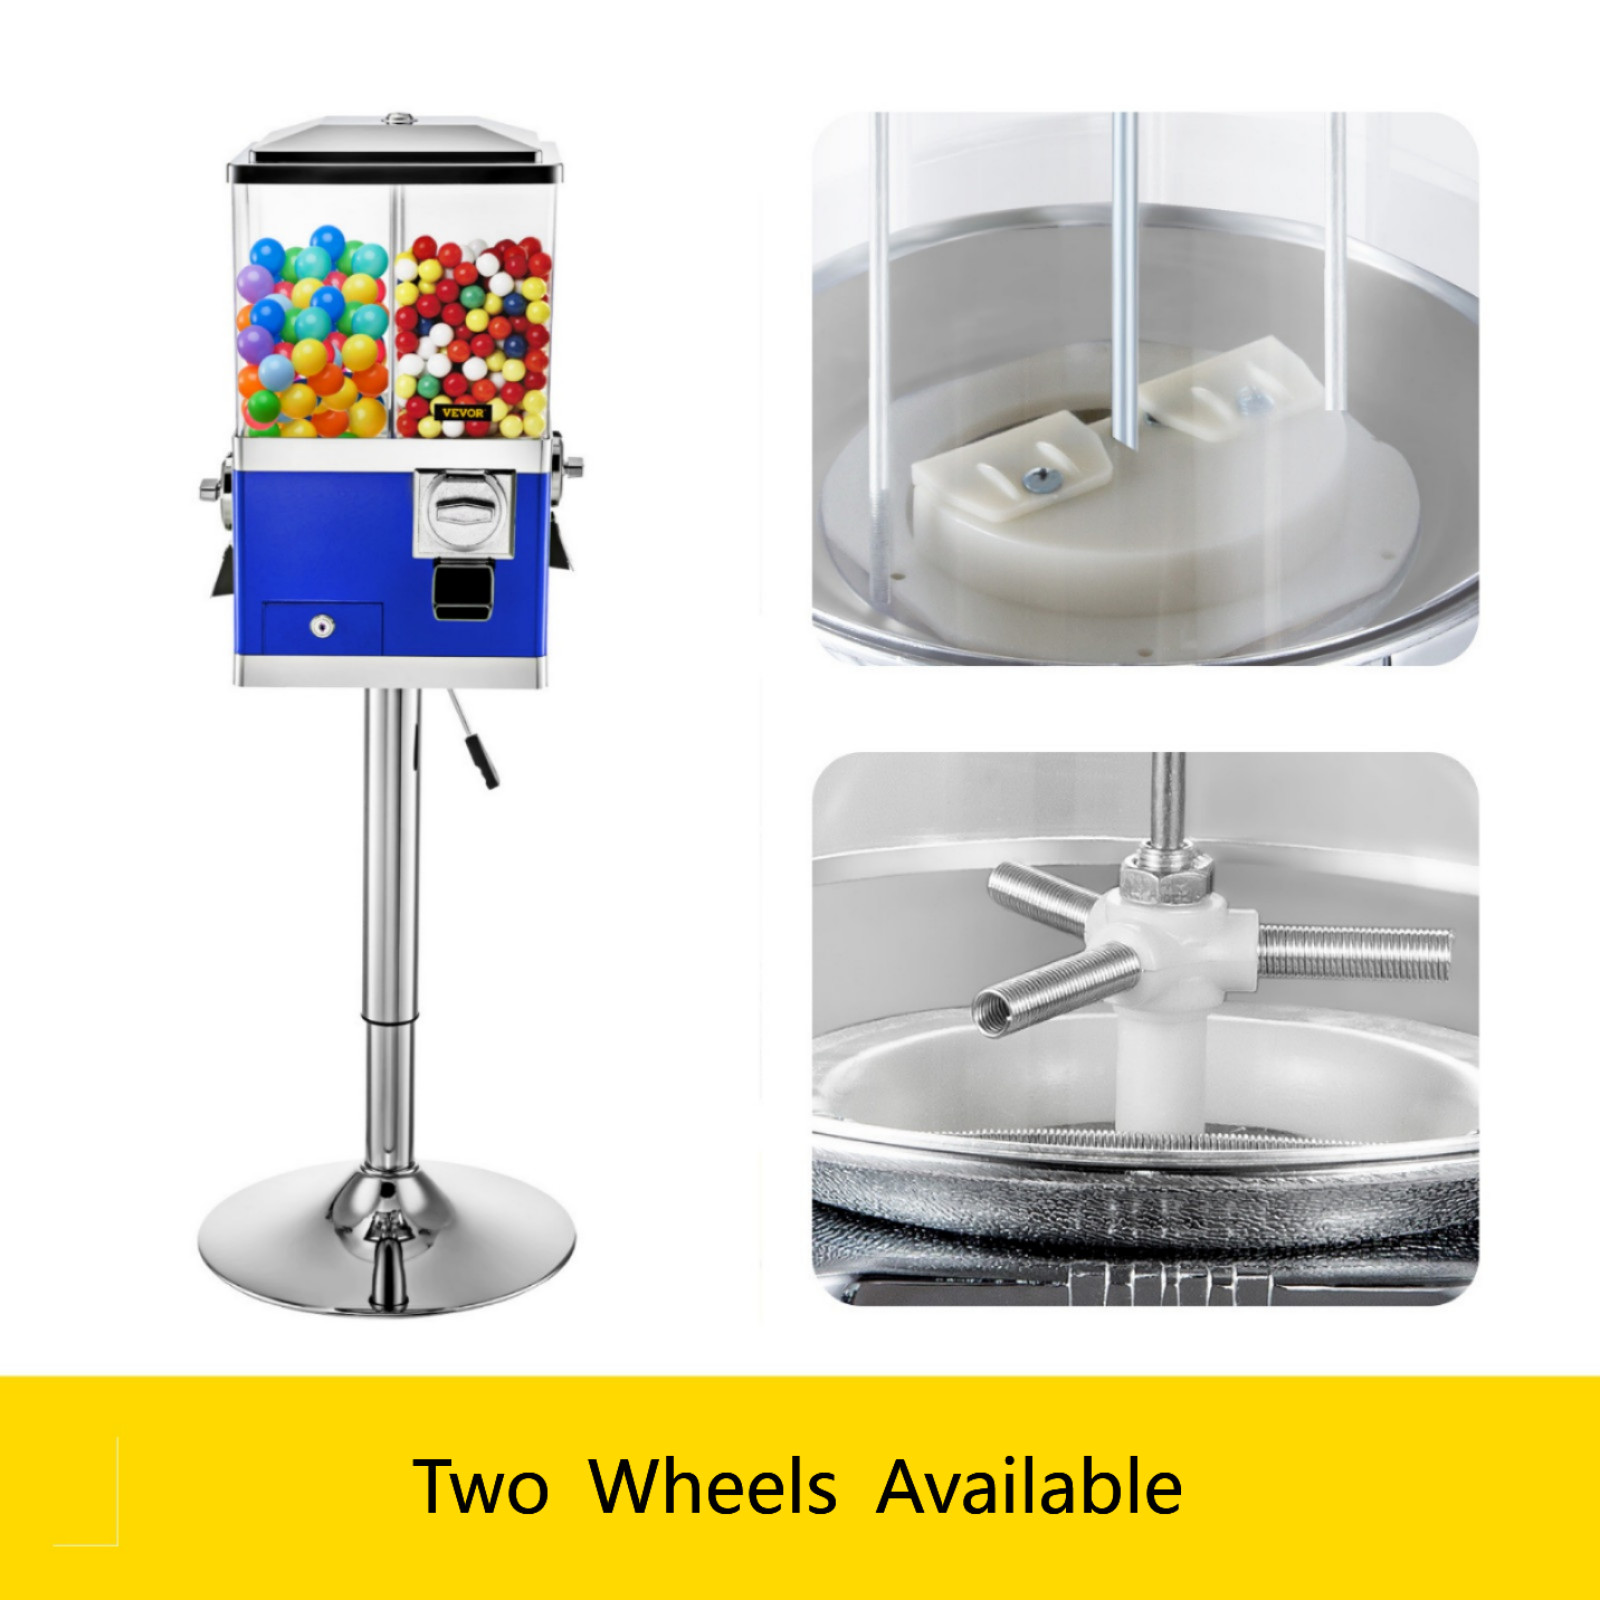 2 Large Or Top U-Turn Vending Candy Machine canisters without candy wheels. 